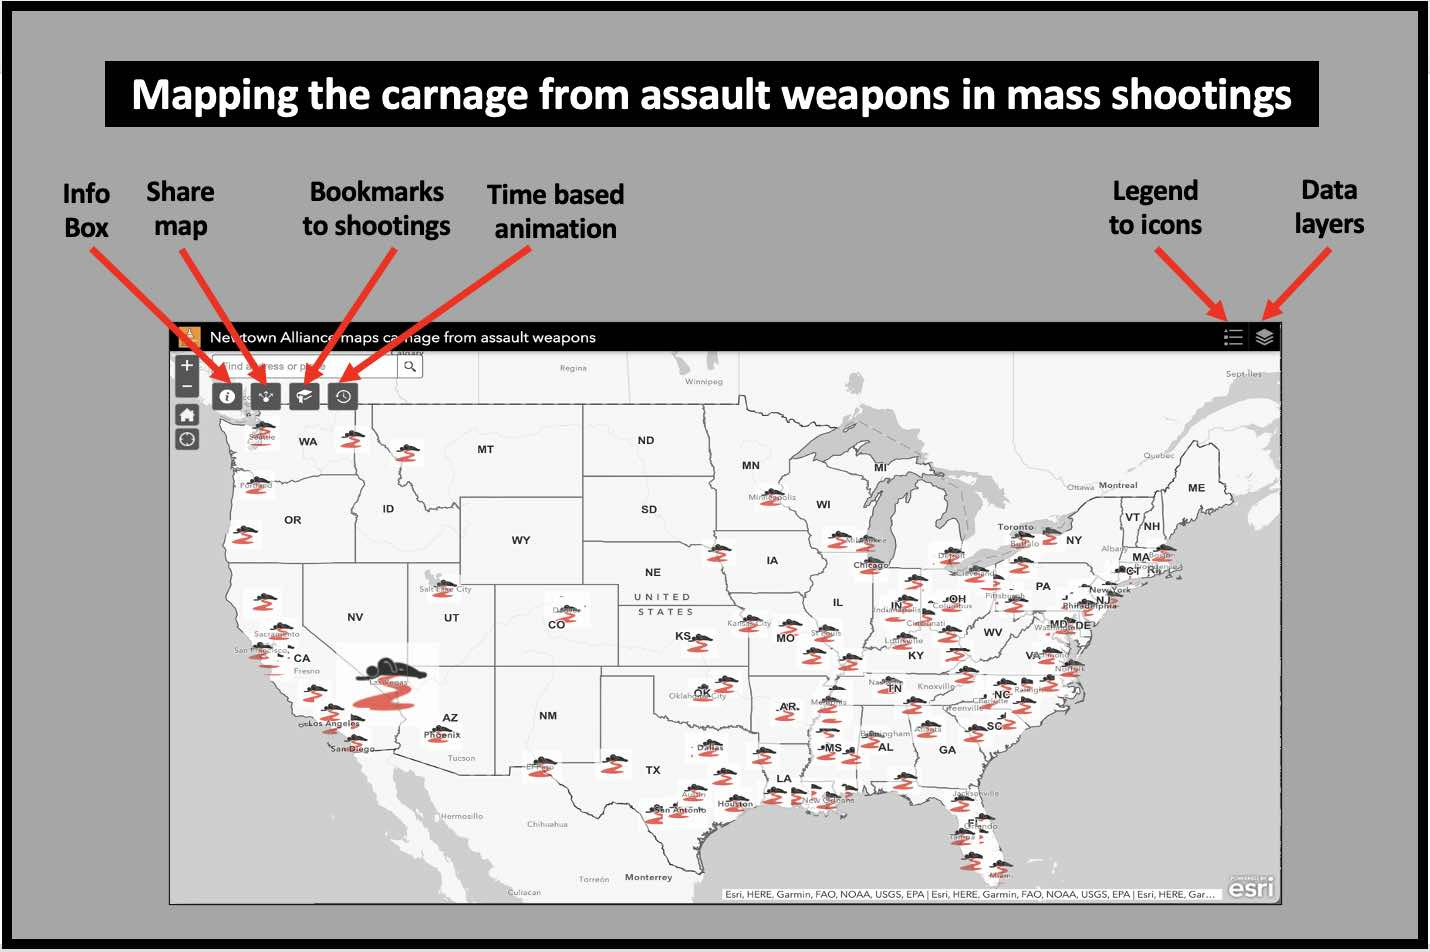 Mapping the carnage from assault weapons at mass shootings